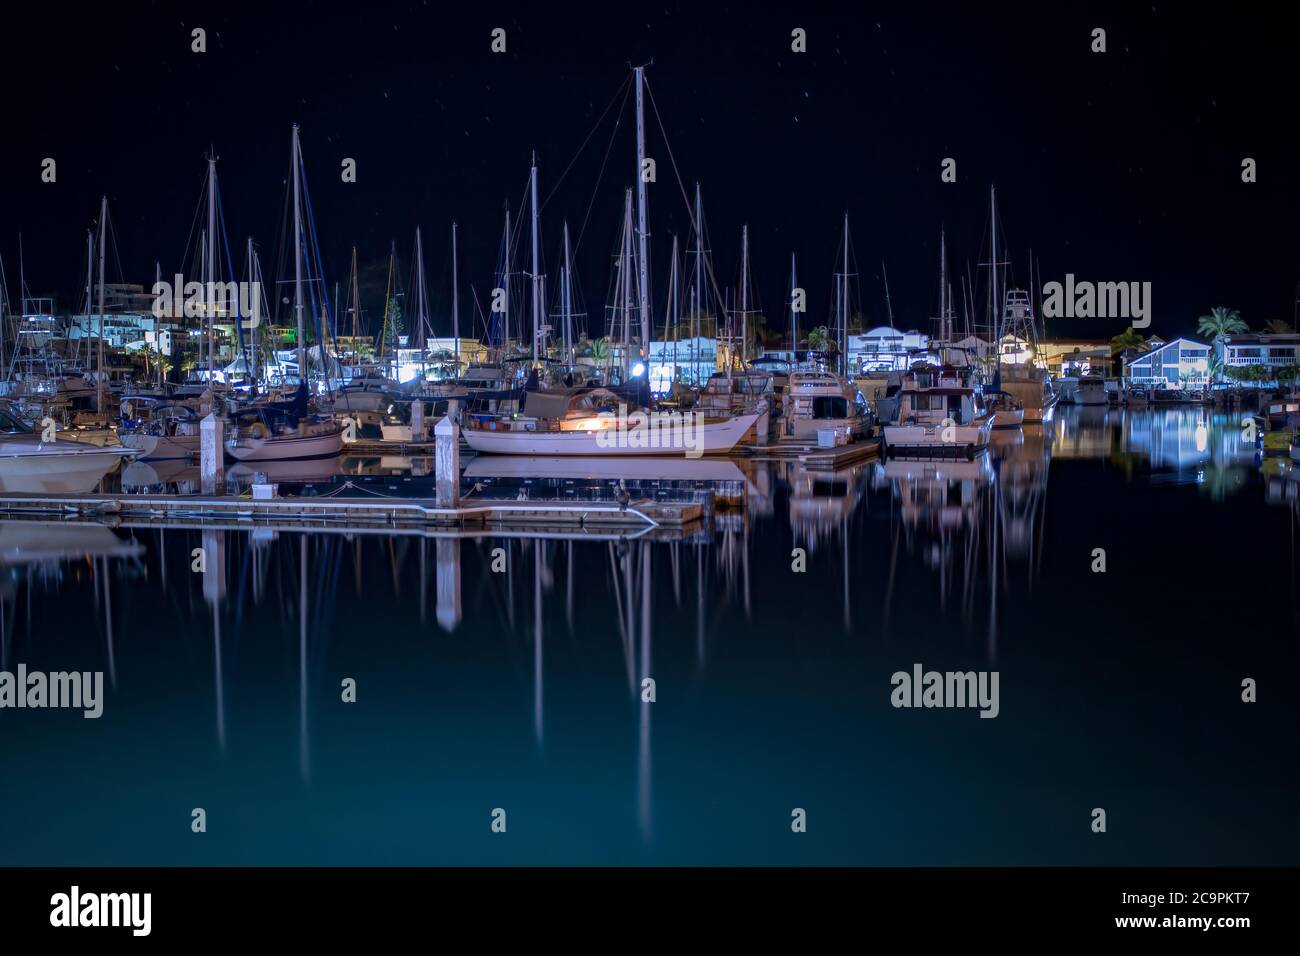 Night shot of boats in their slips on a tranquil night at Marina Real in in the Sea of Cortez, San Carlos, Sonora, Mexico. Stock Photo